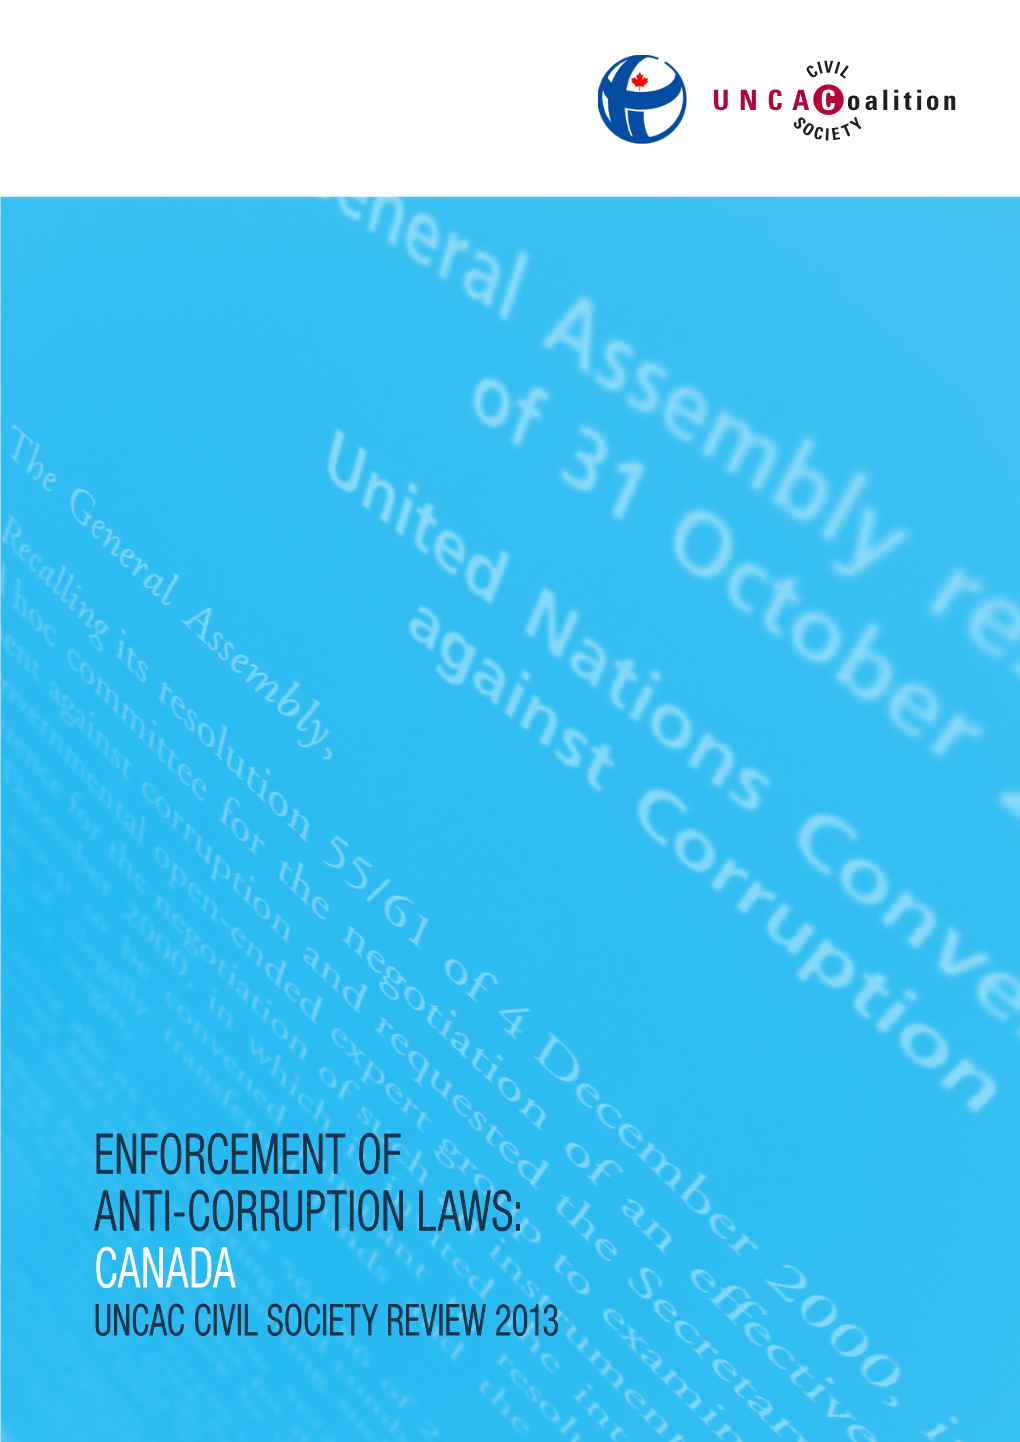 Canada Uncac Civil Society Review 2013